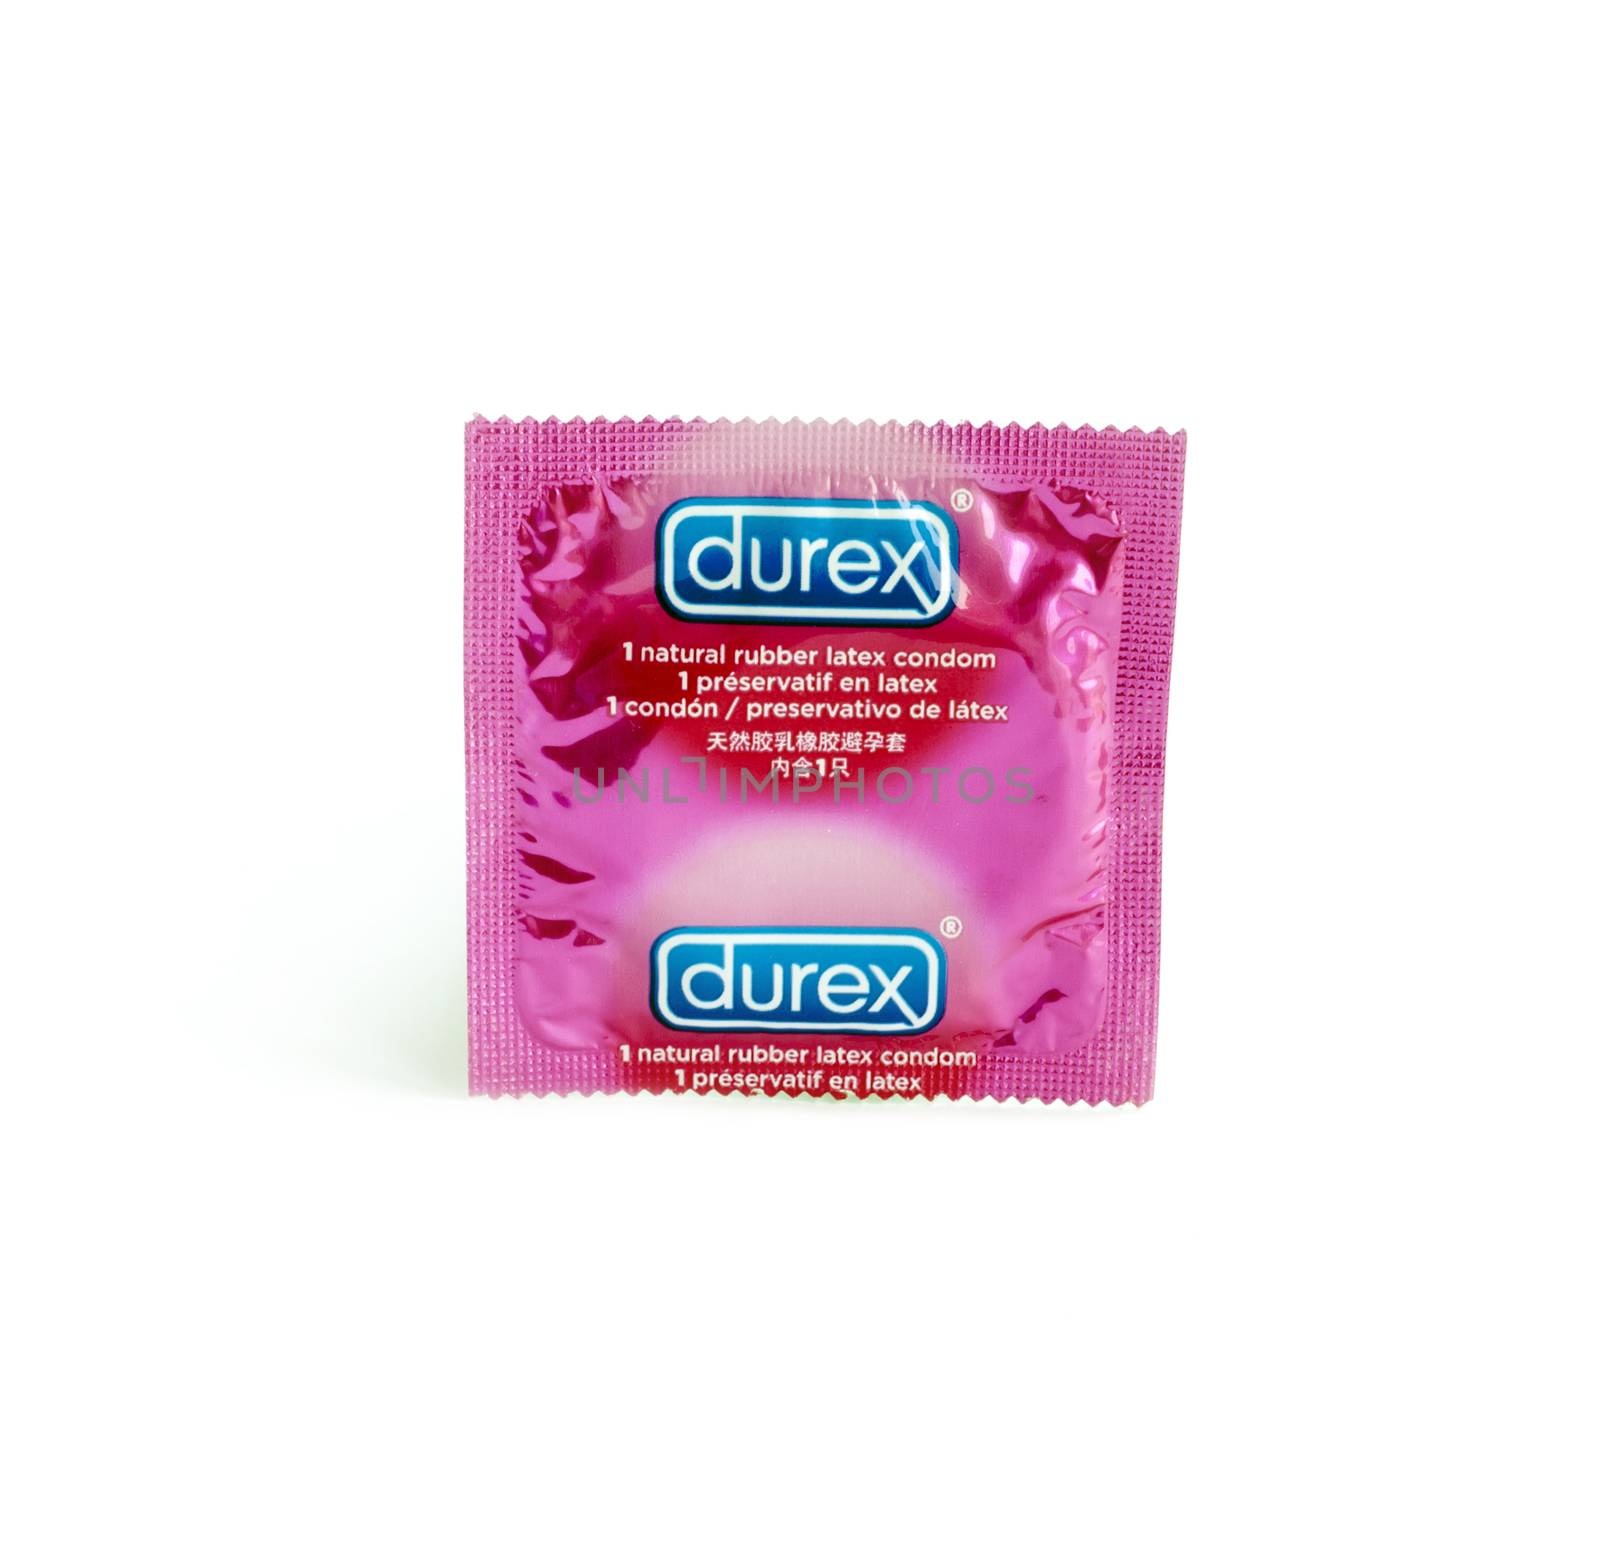 Photo of a Durex condom isolated on white by maxmitzu